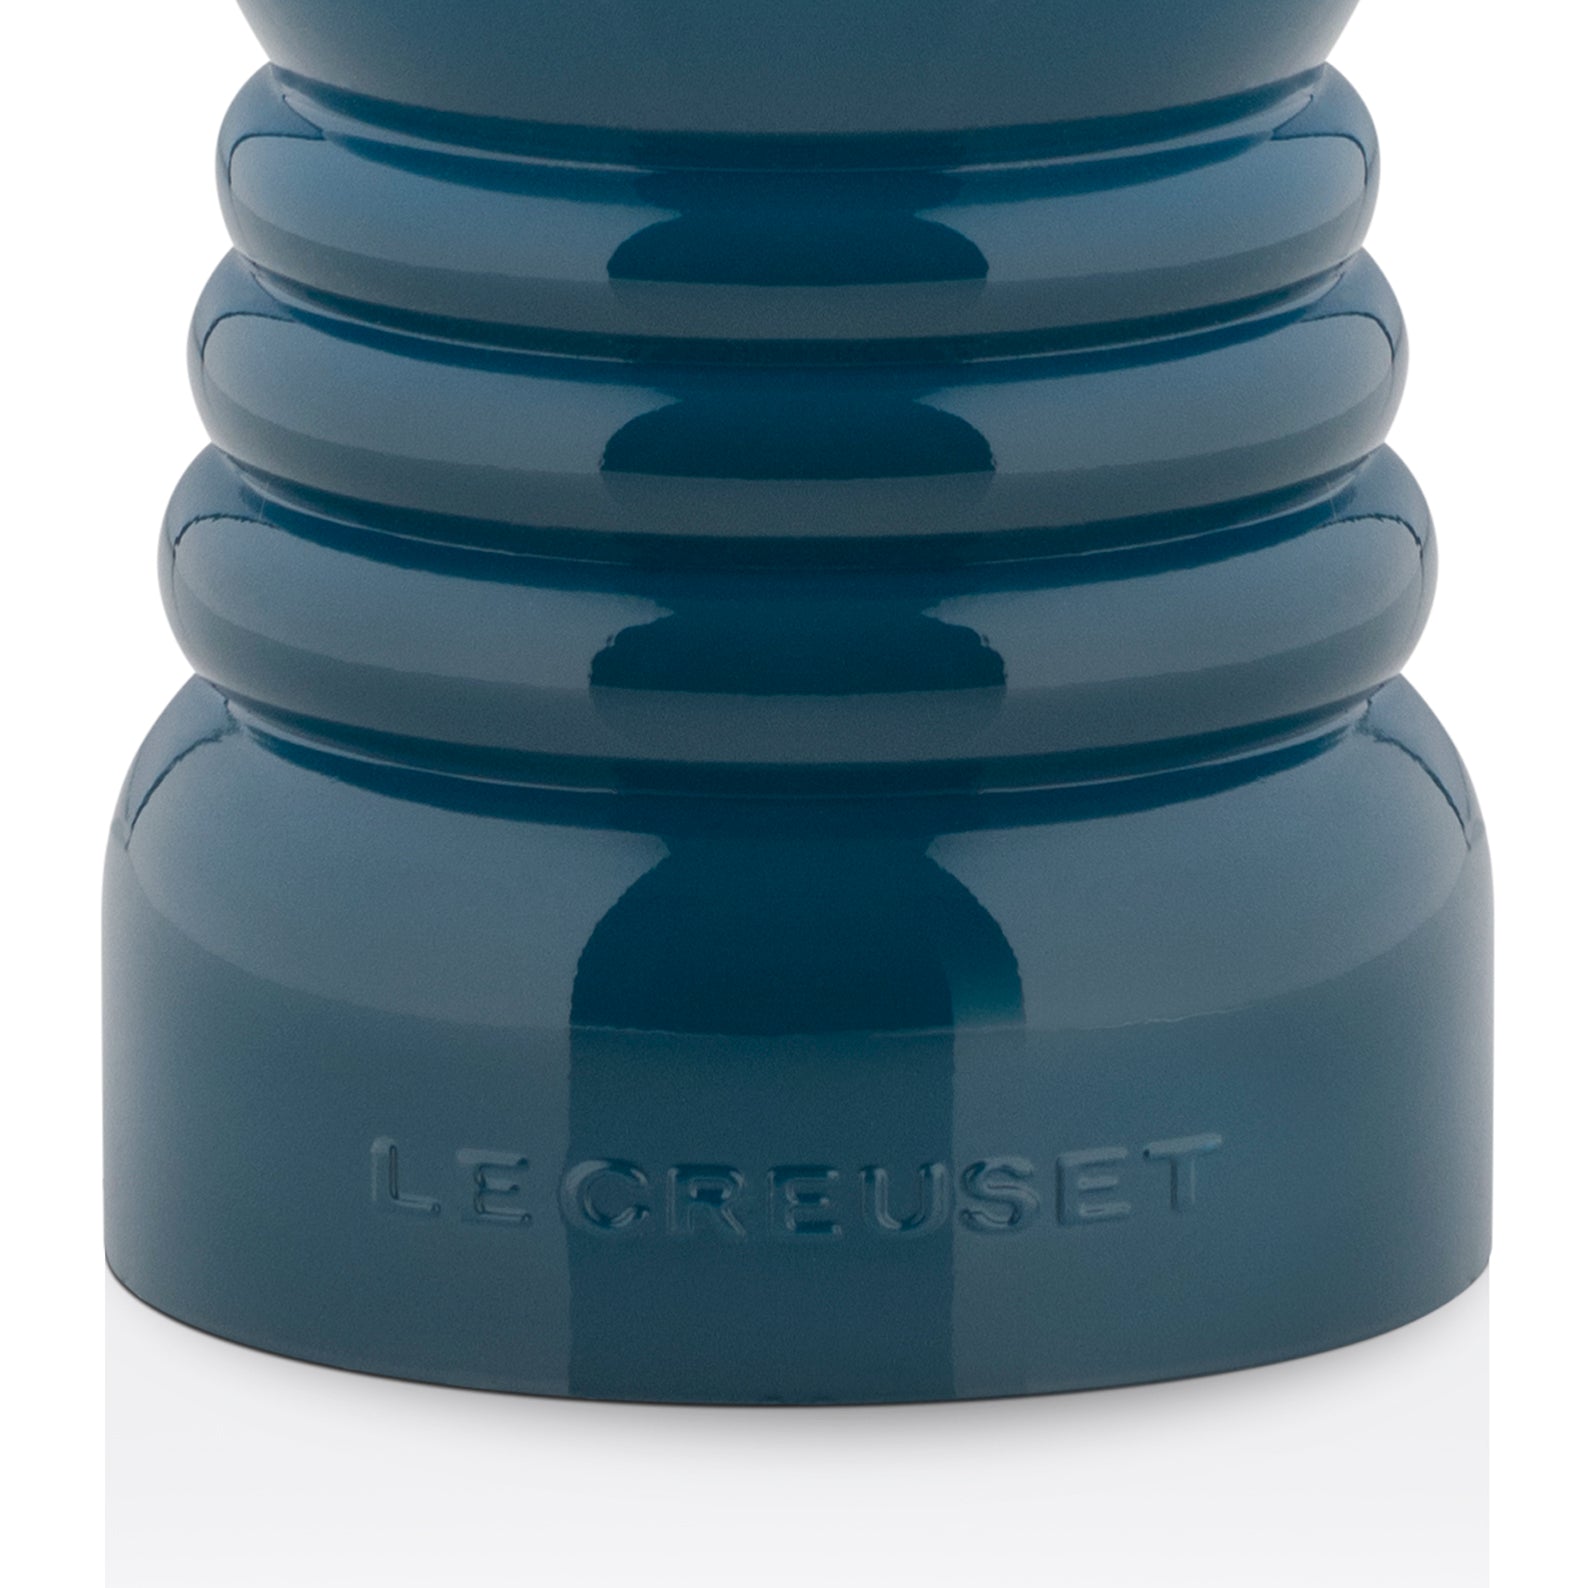 The bottom of the pepper mill with the embossed le creuset logo